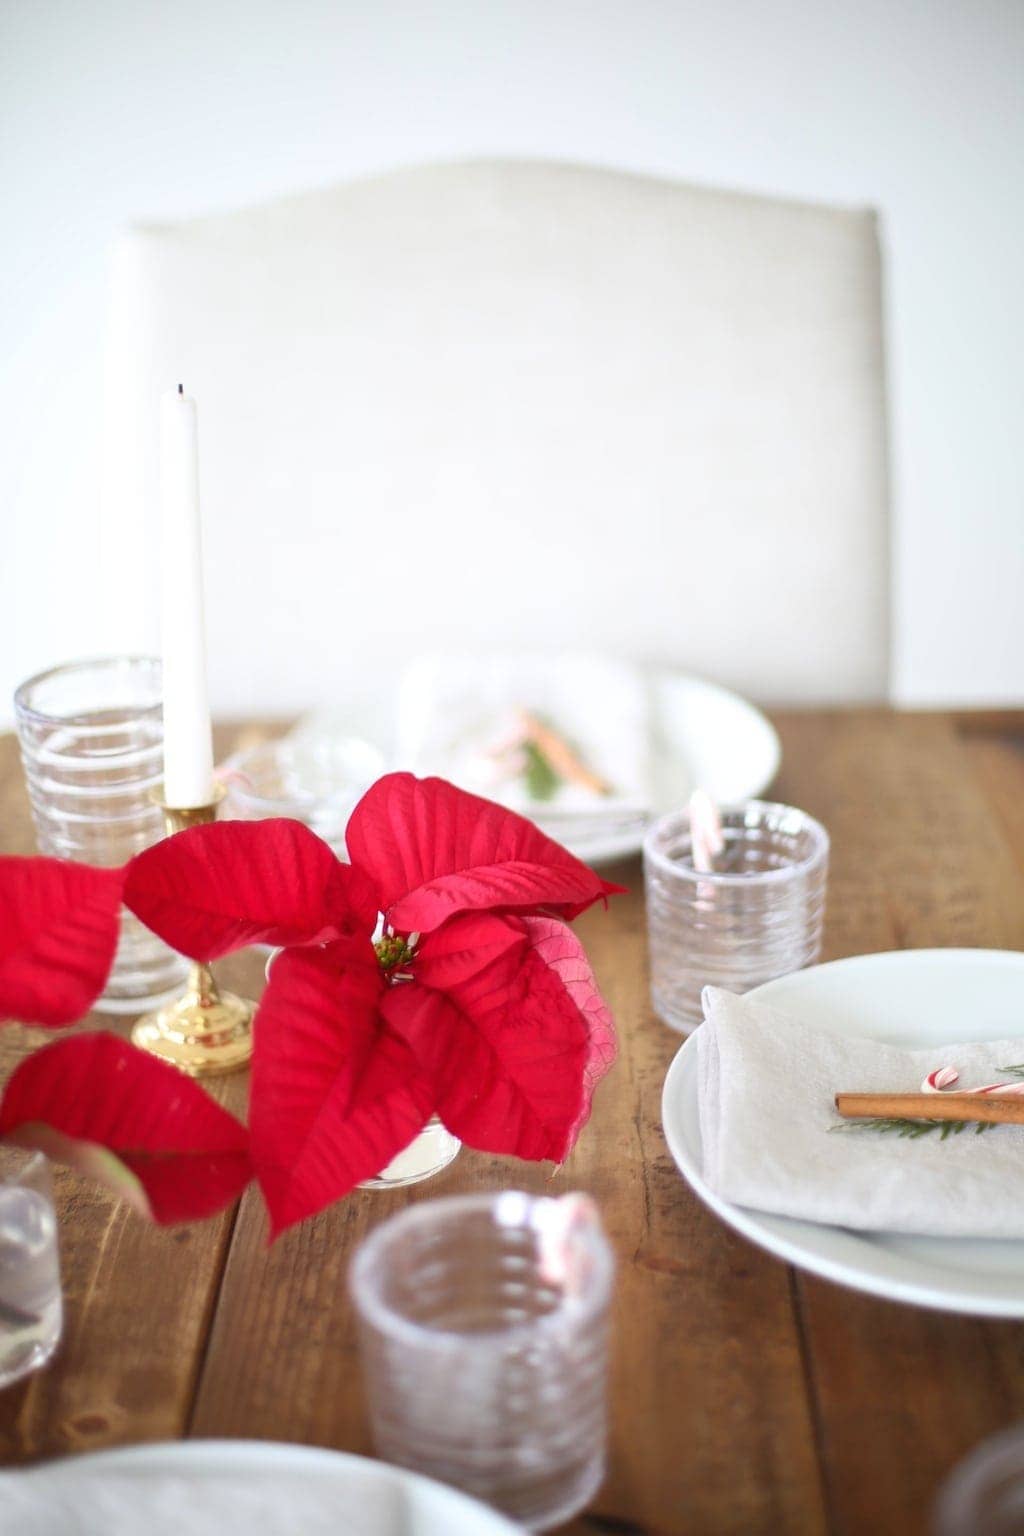 A red Poinsettia centerpiece cut into vases down the center of a table